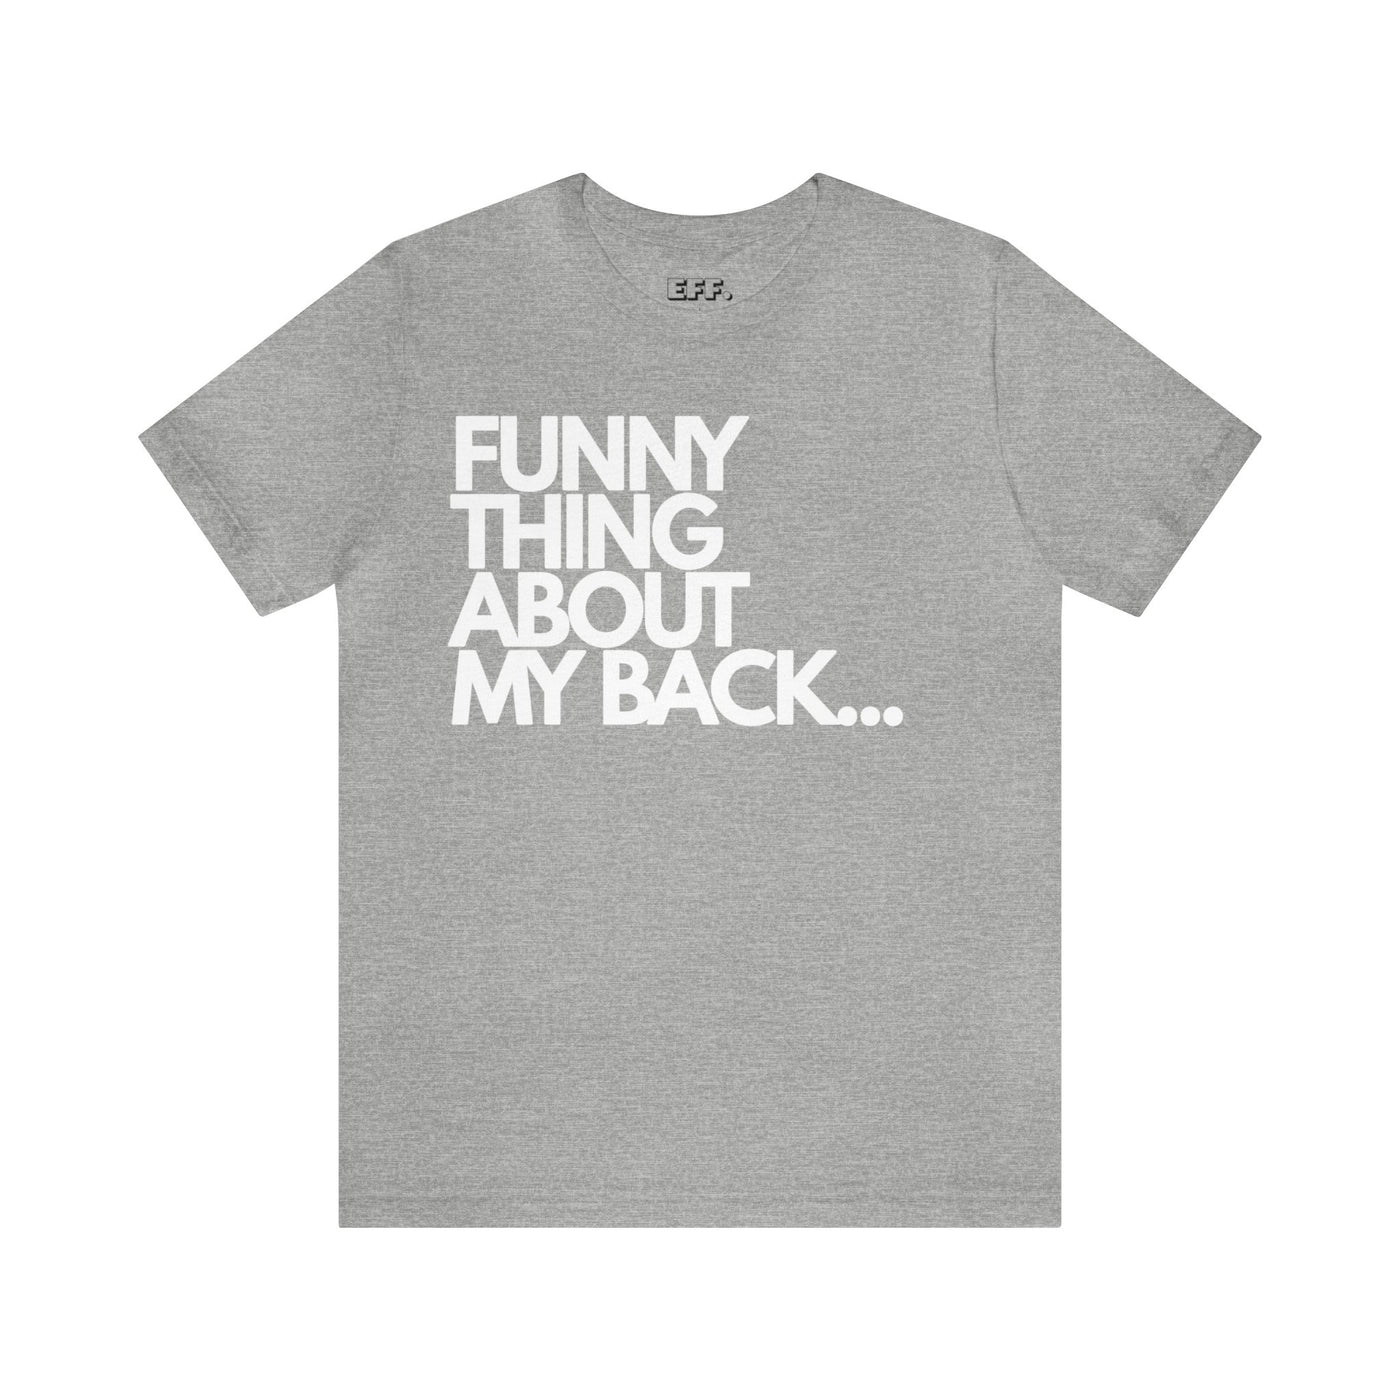 Funny Thing About My Back...